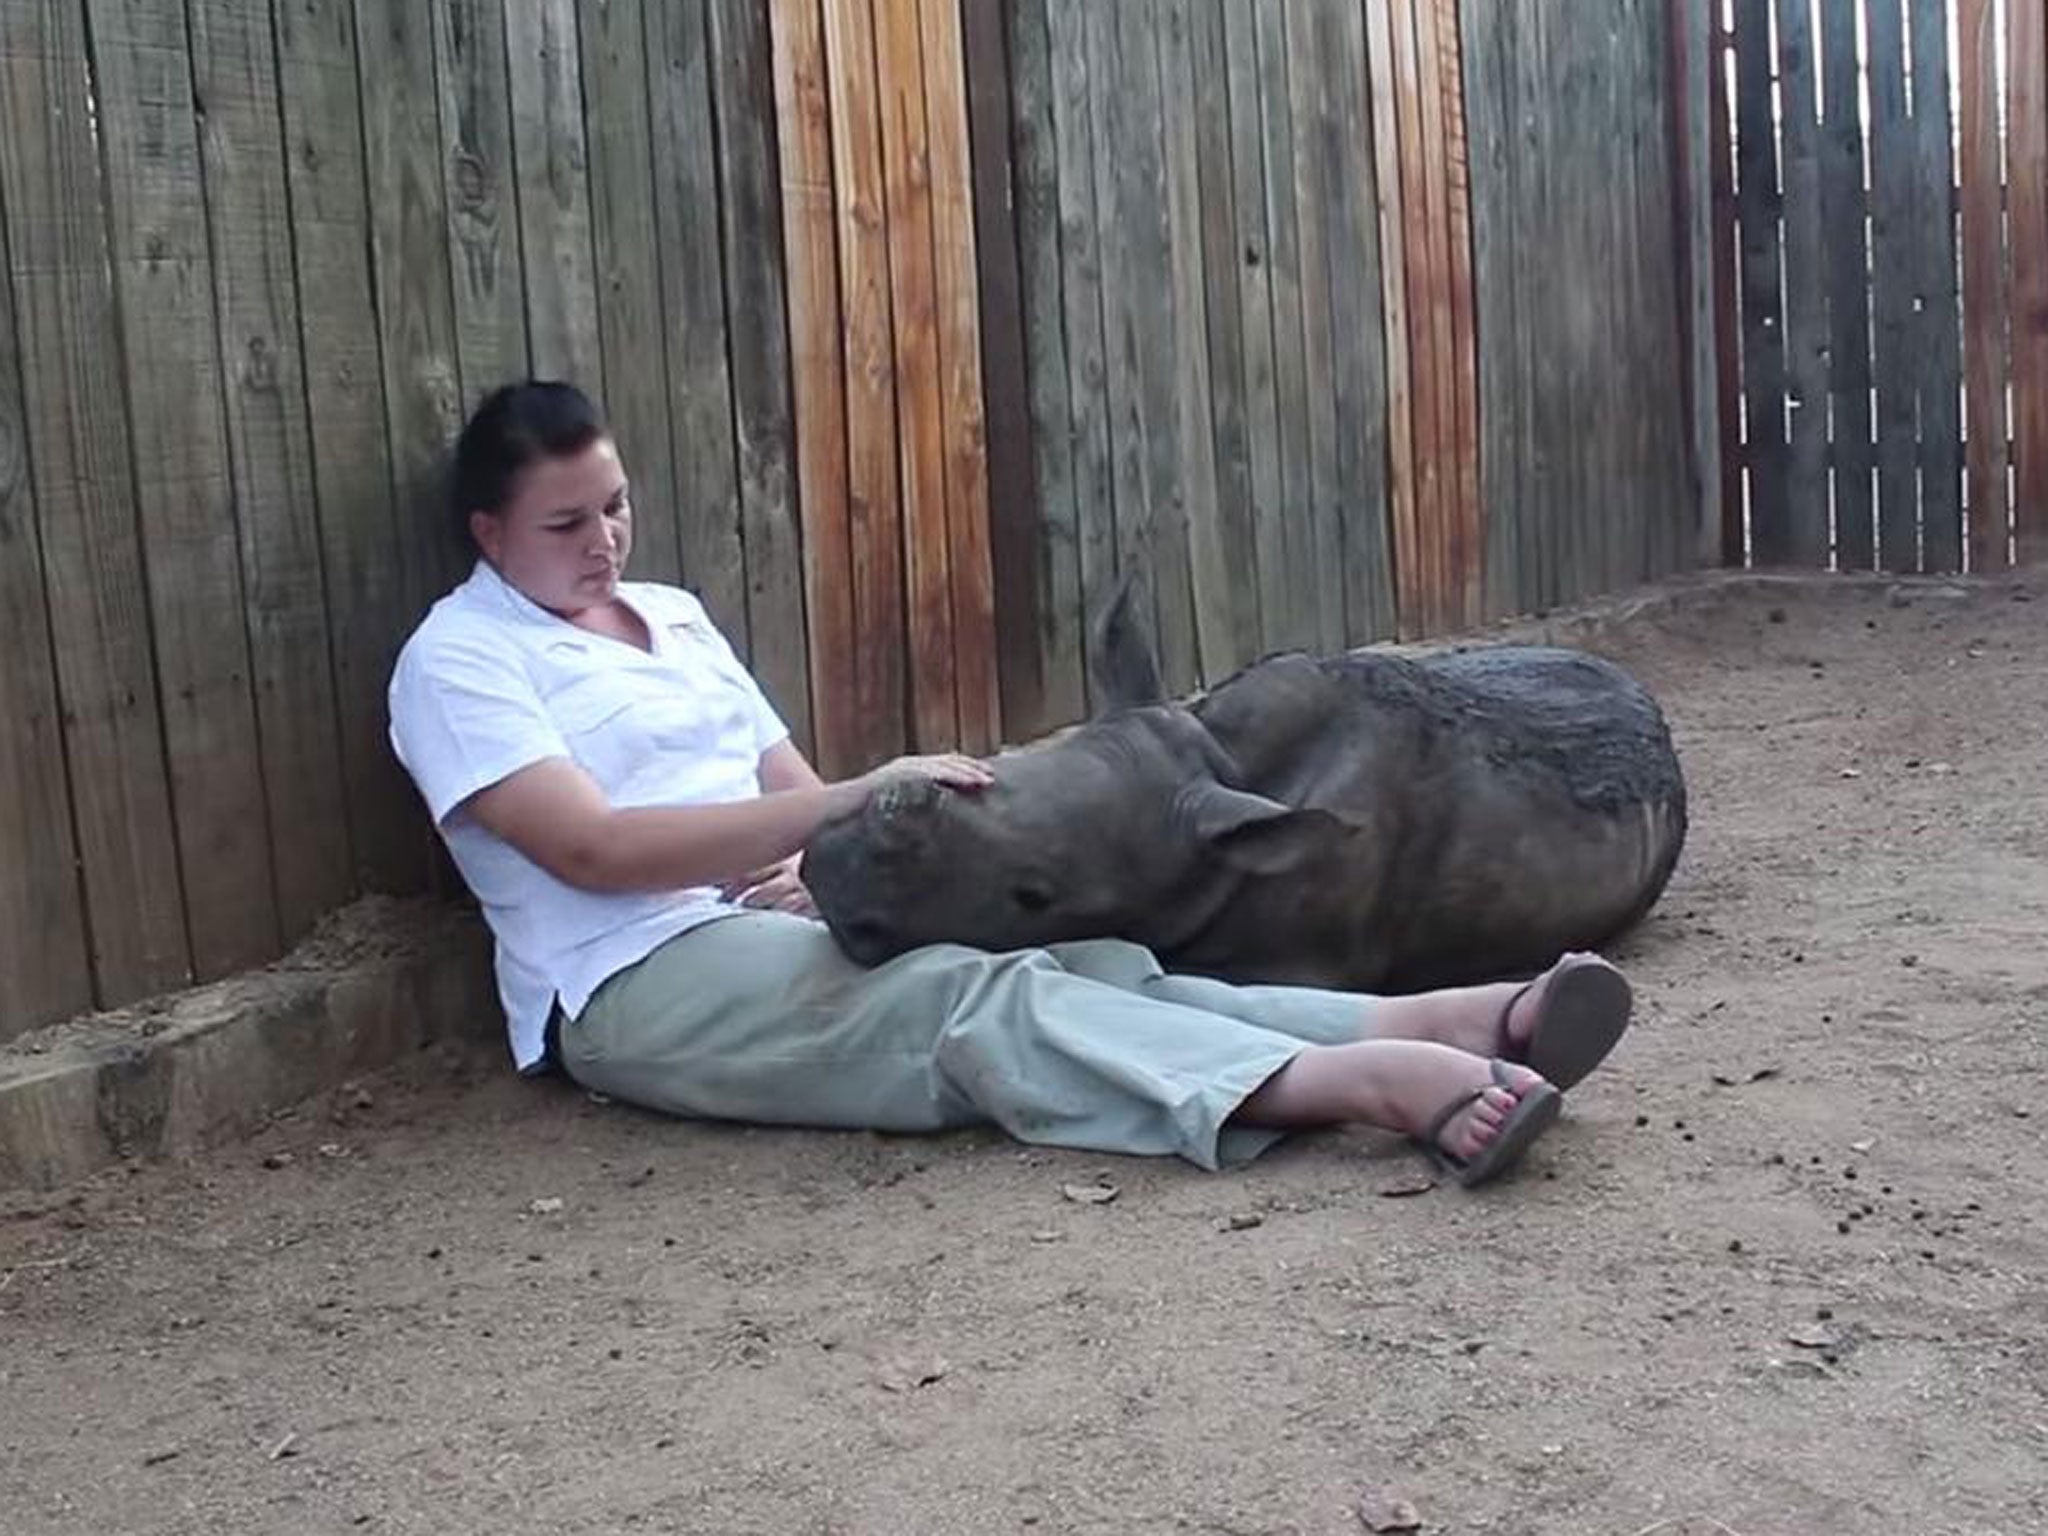 Gertjie the rhino cuddles up with a member of staff at the Hoedspruit Endangered Species Centre